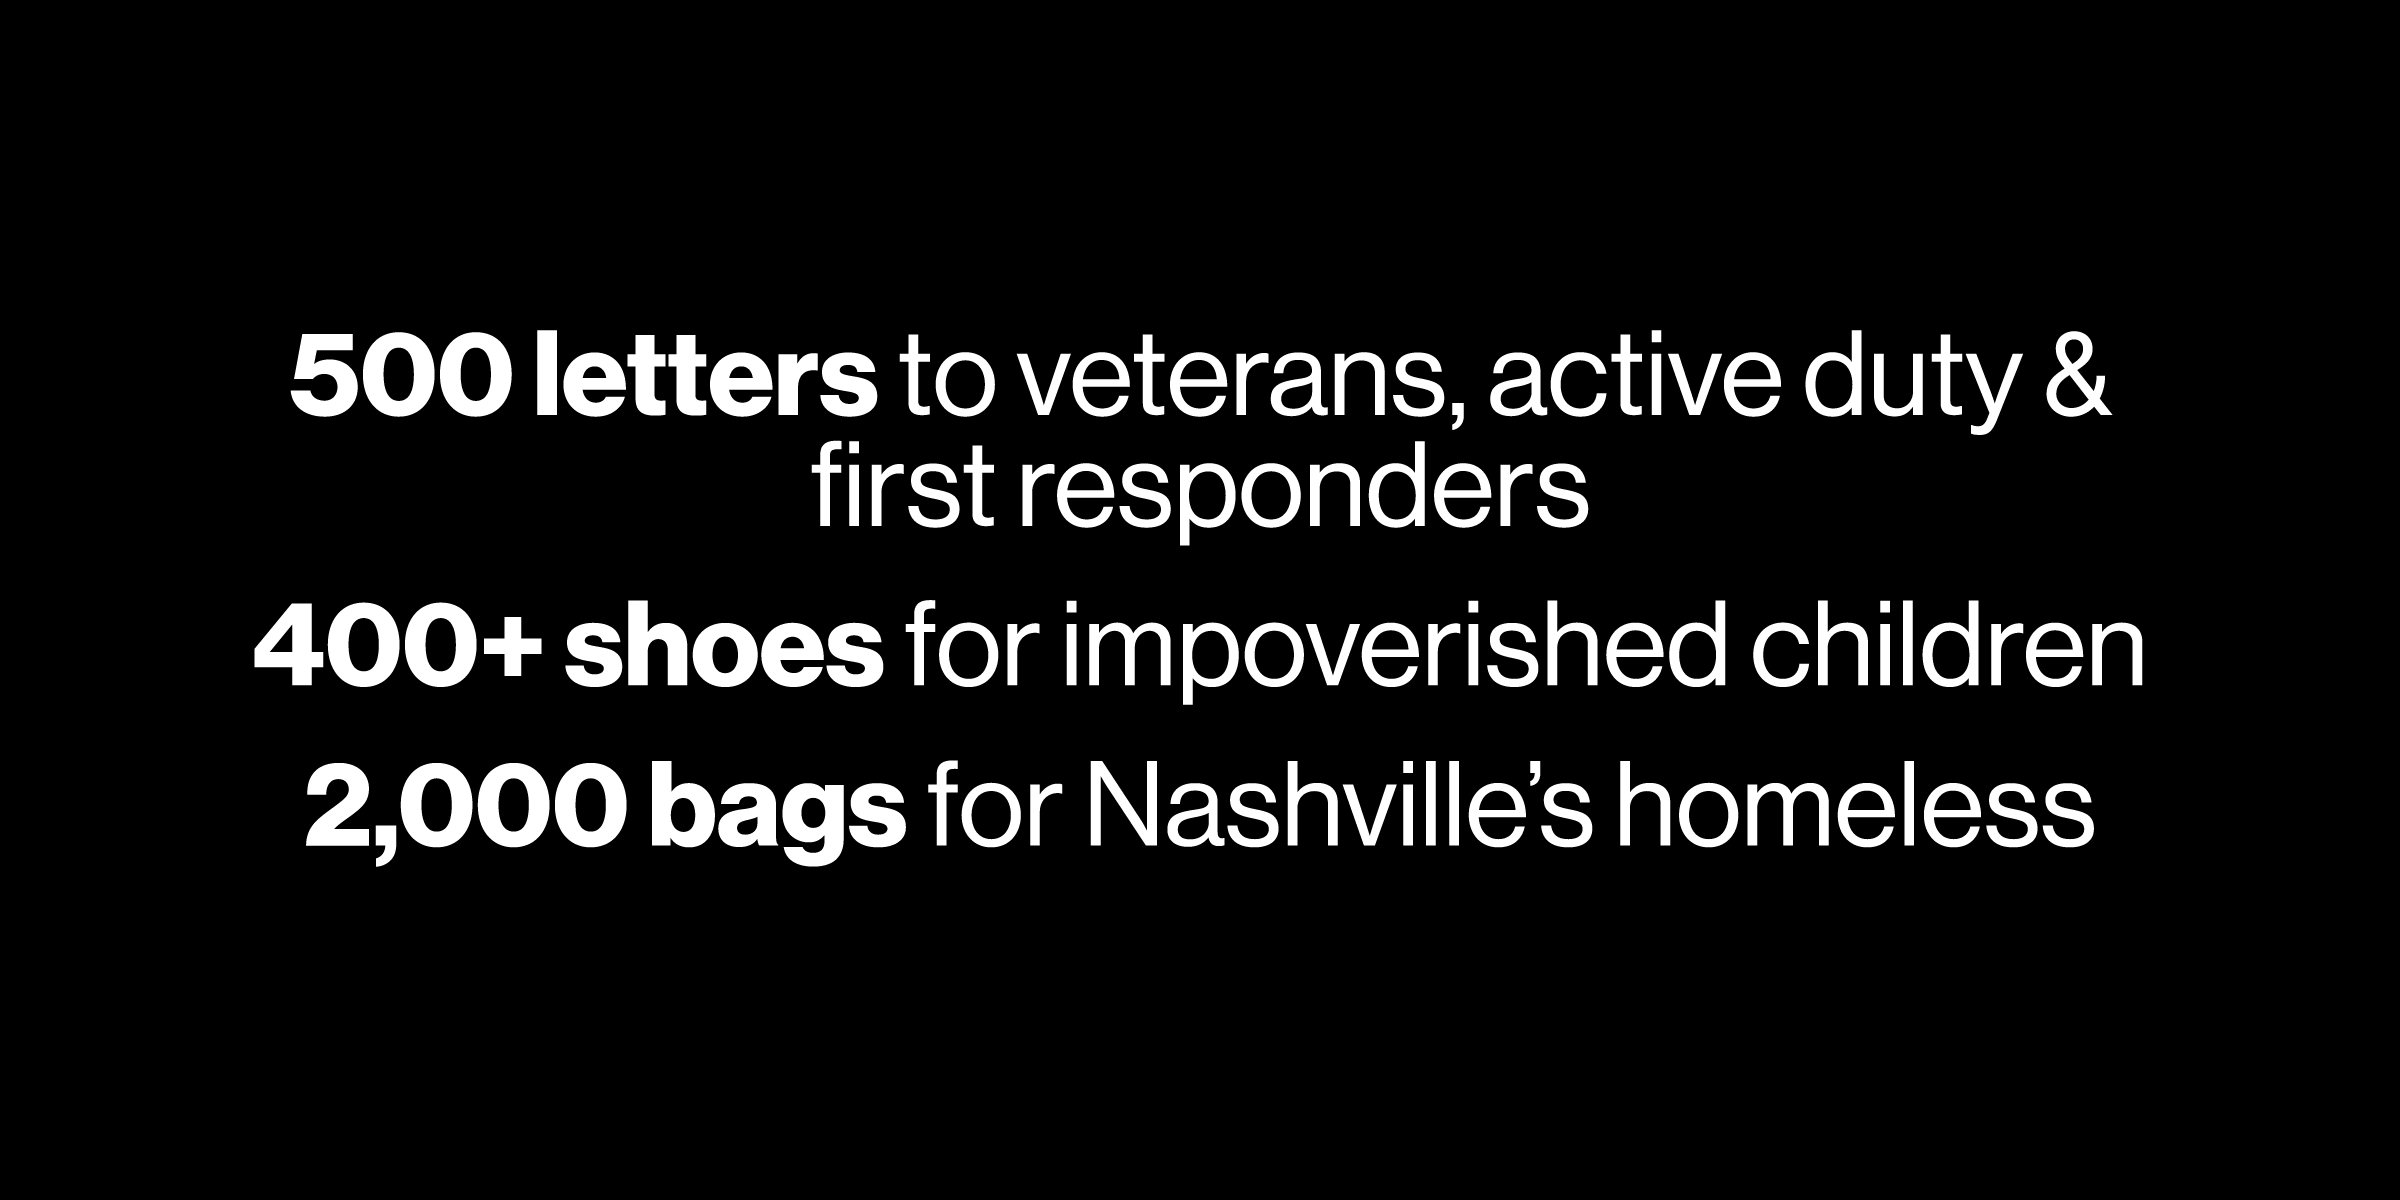 500 letters to veterans, active duty and first responders; 400 shoes for impoverished children; 2,000 bags for Nashville